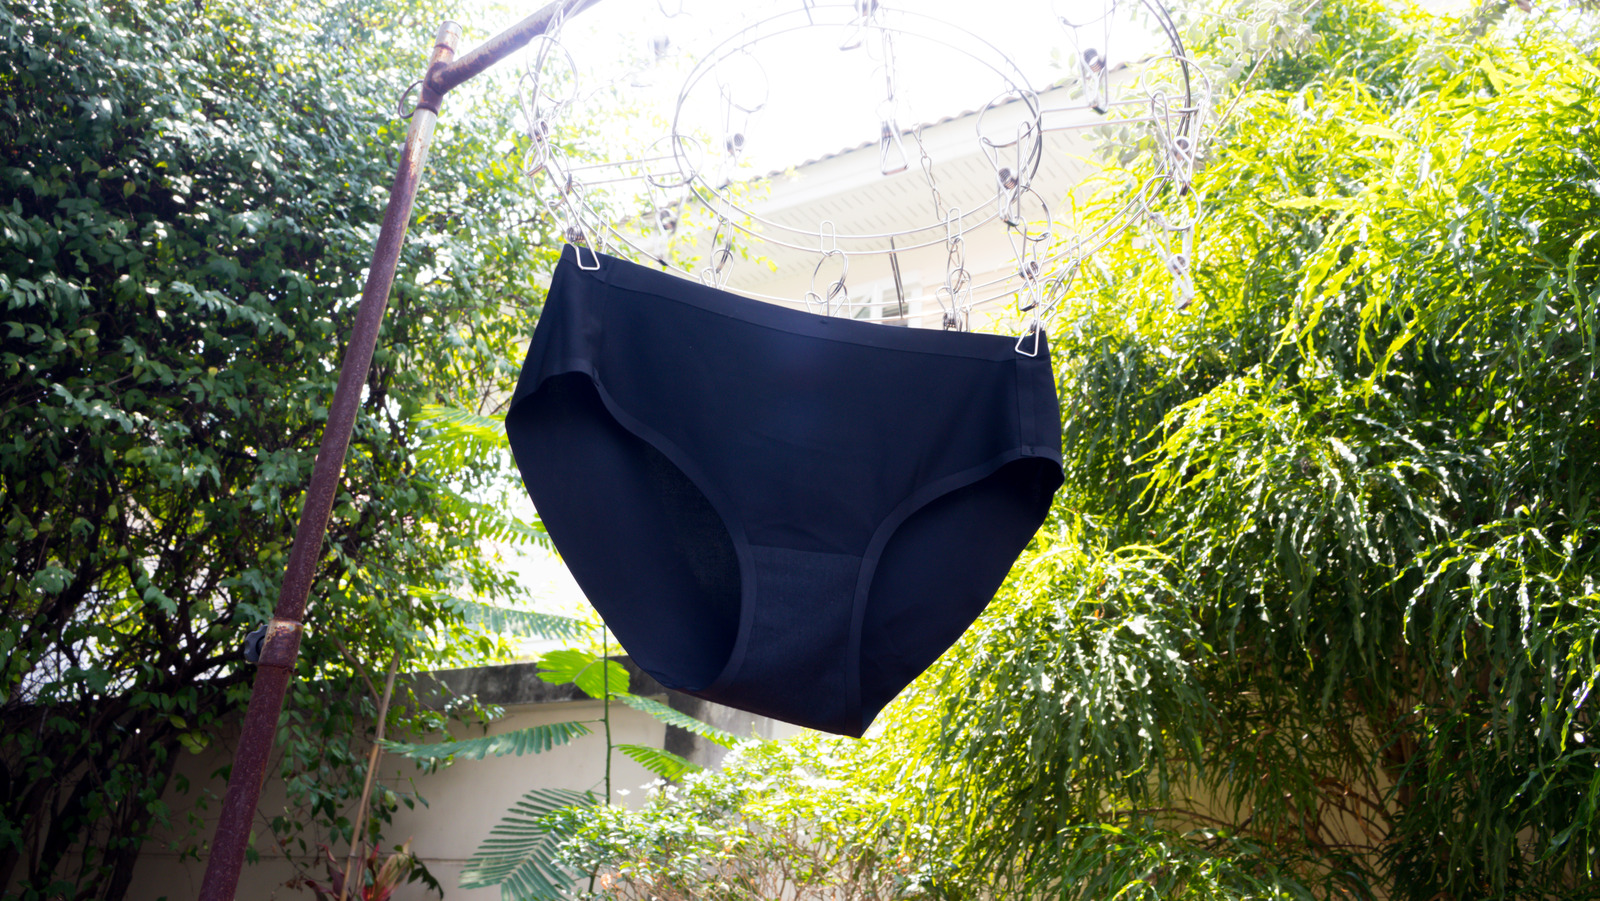 https://www.housedigest.com/img/gallery/the-weird-gardening-hack-that-uses-a-pair-of-underwear-to-test-soil/l-intro-1694100785.jpg